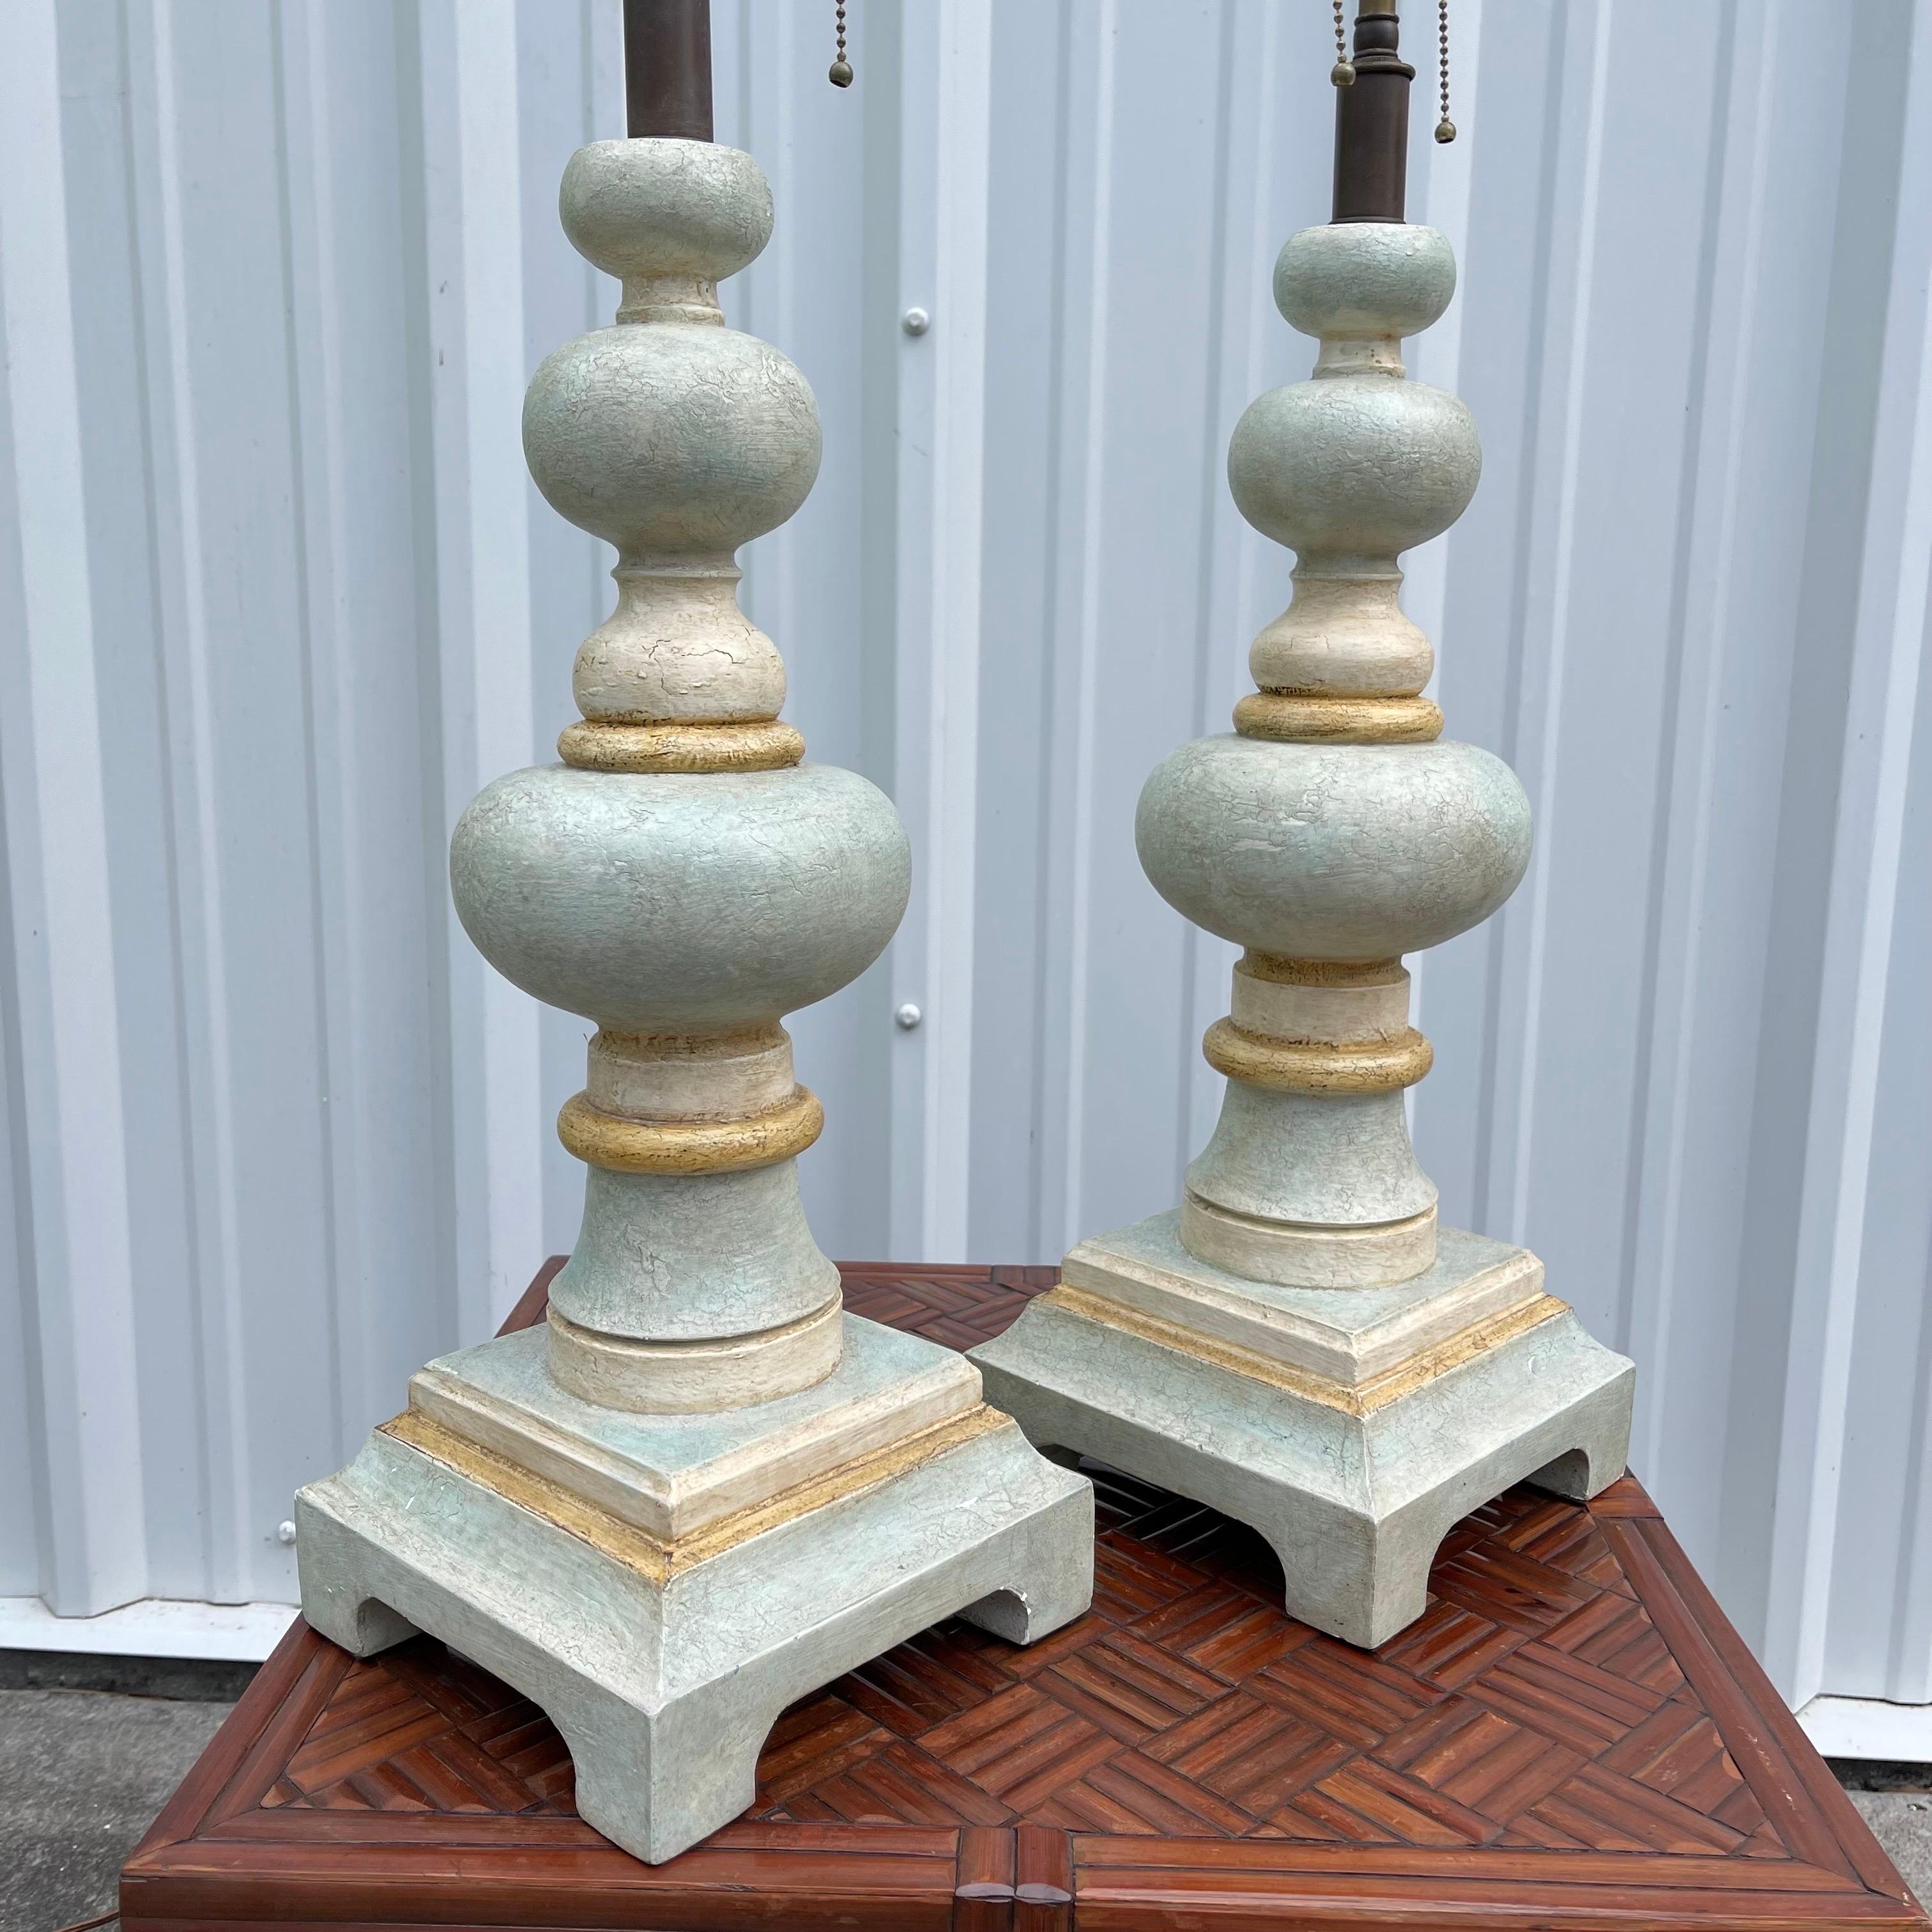 Hollywood Regency Painted Patinated Carved Wood Bobbin Tables Lamps, a Pair For Sale 6